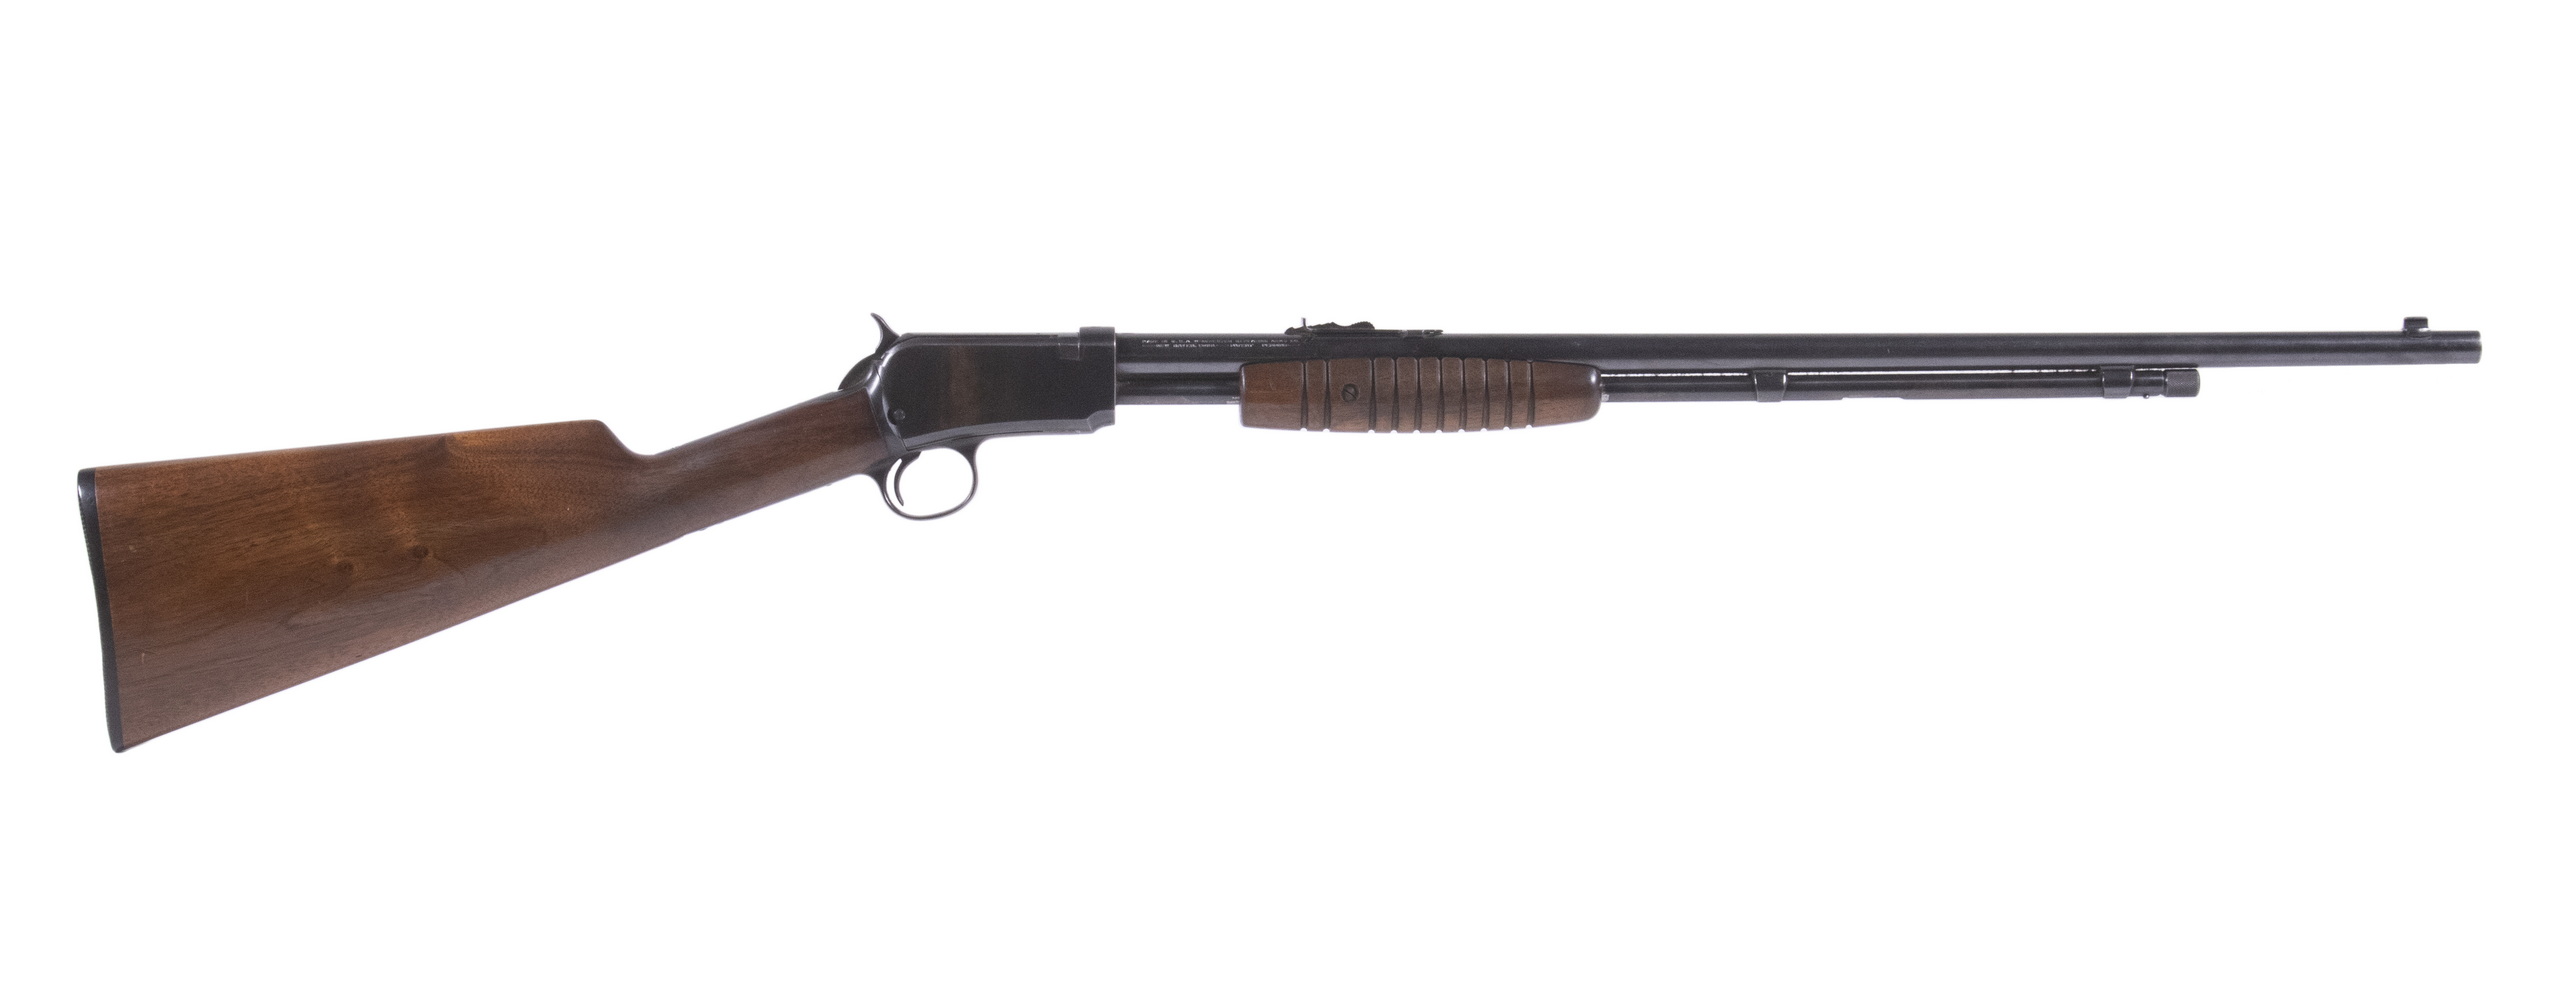 WINCHESTER MDL 62 PUMP ACTION 3b6453